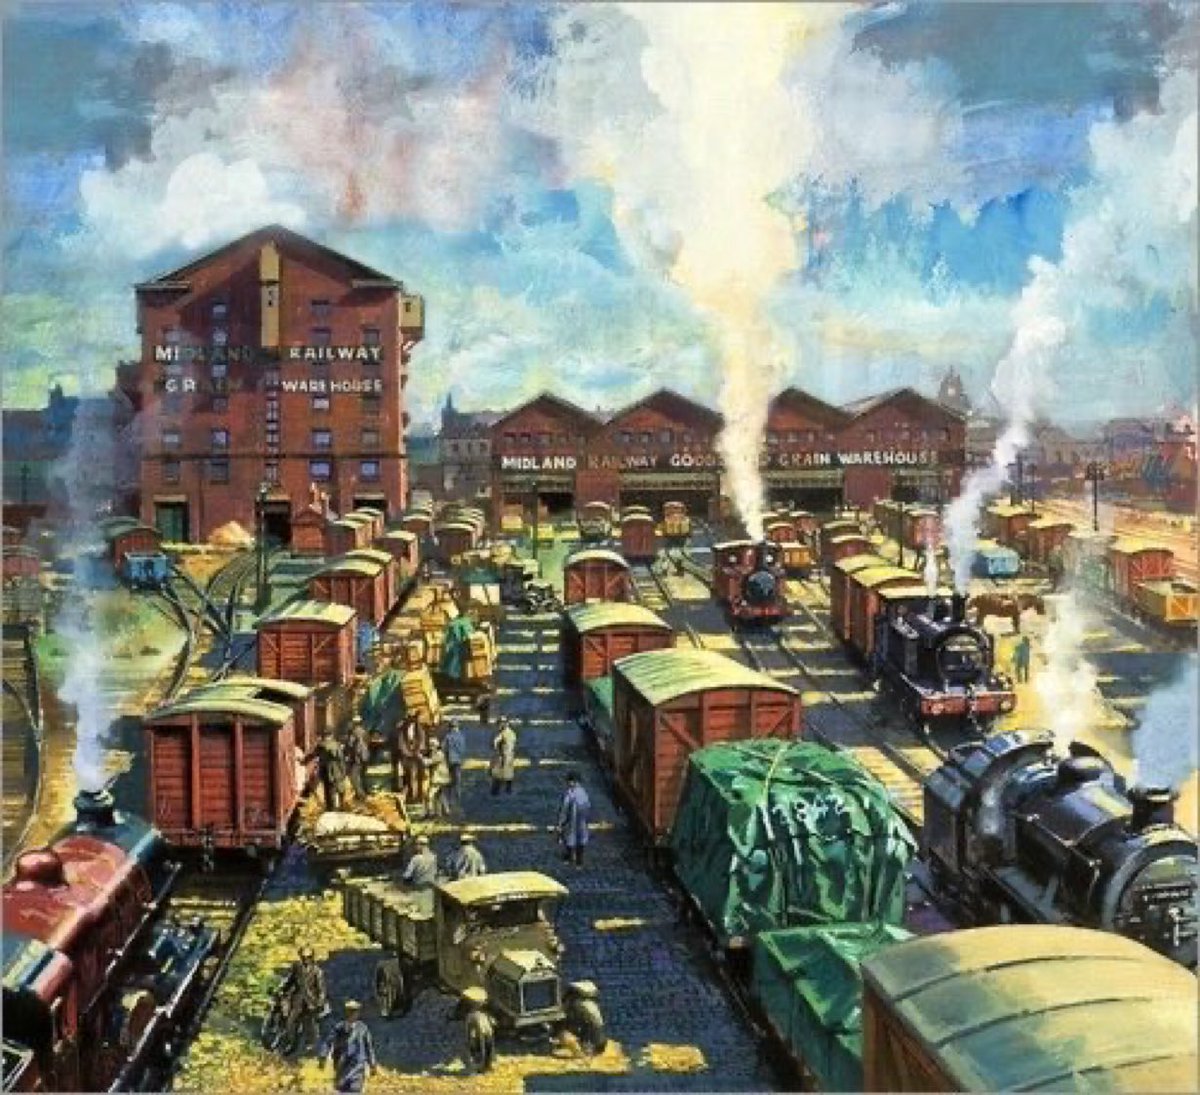 Midland Railways Freight Depot, #Nottingham 1920s by Harry Green. The train station clock is visible in the background on the right.